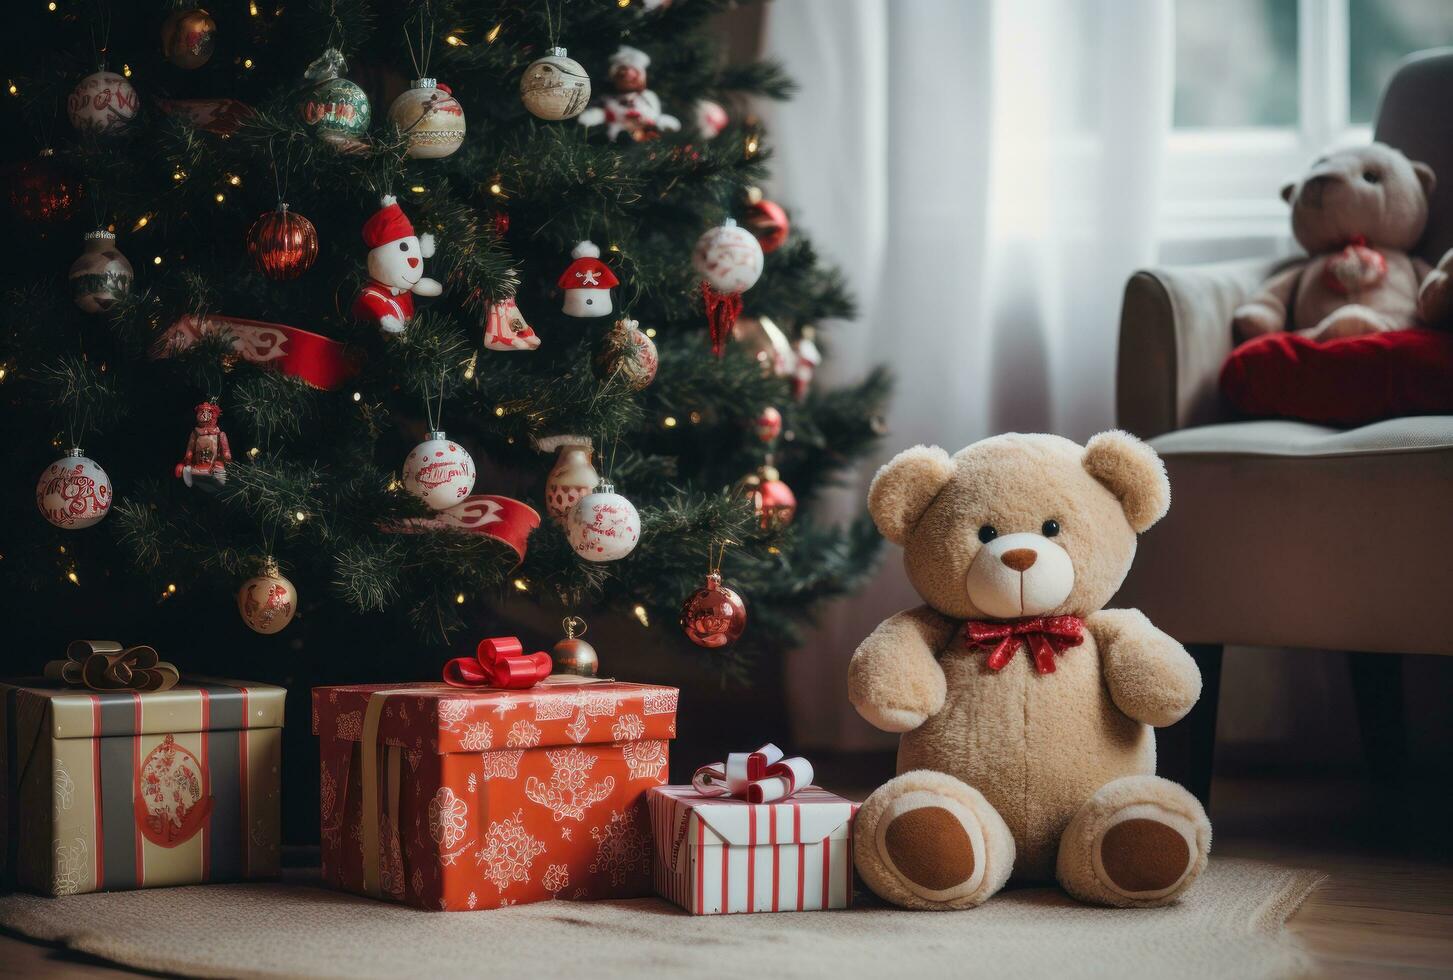 There are toys under the decorated Christmas tree photo